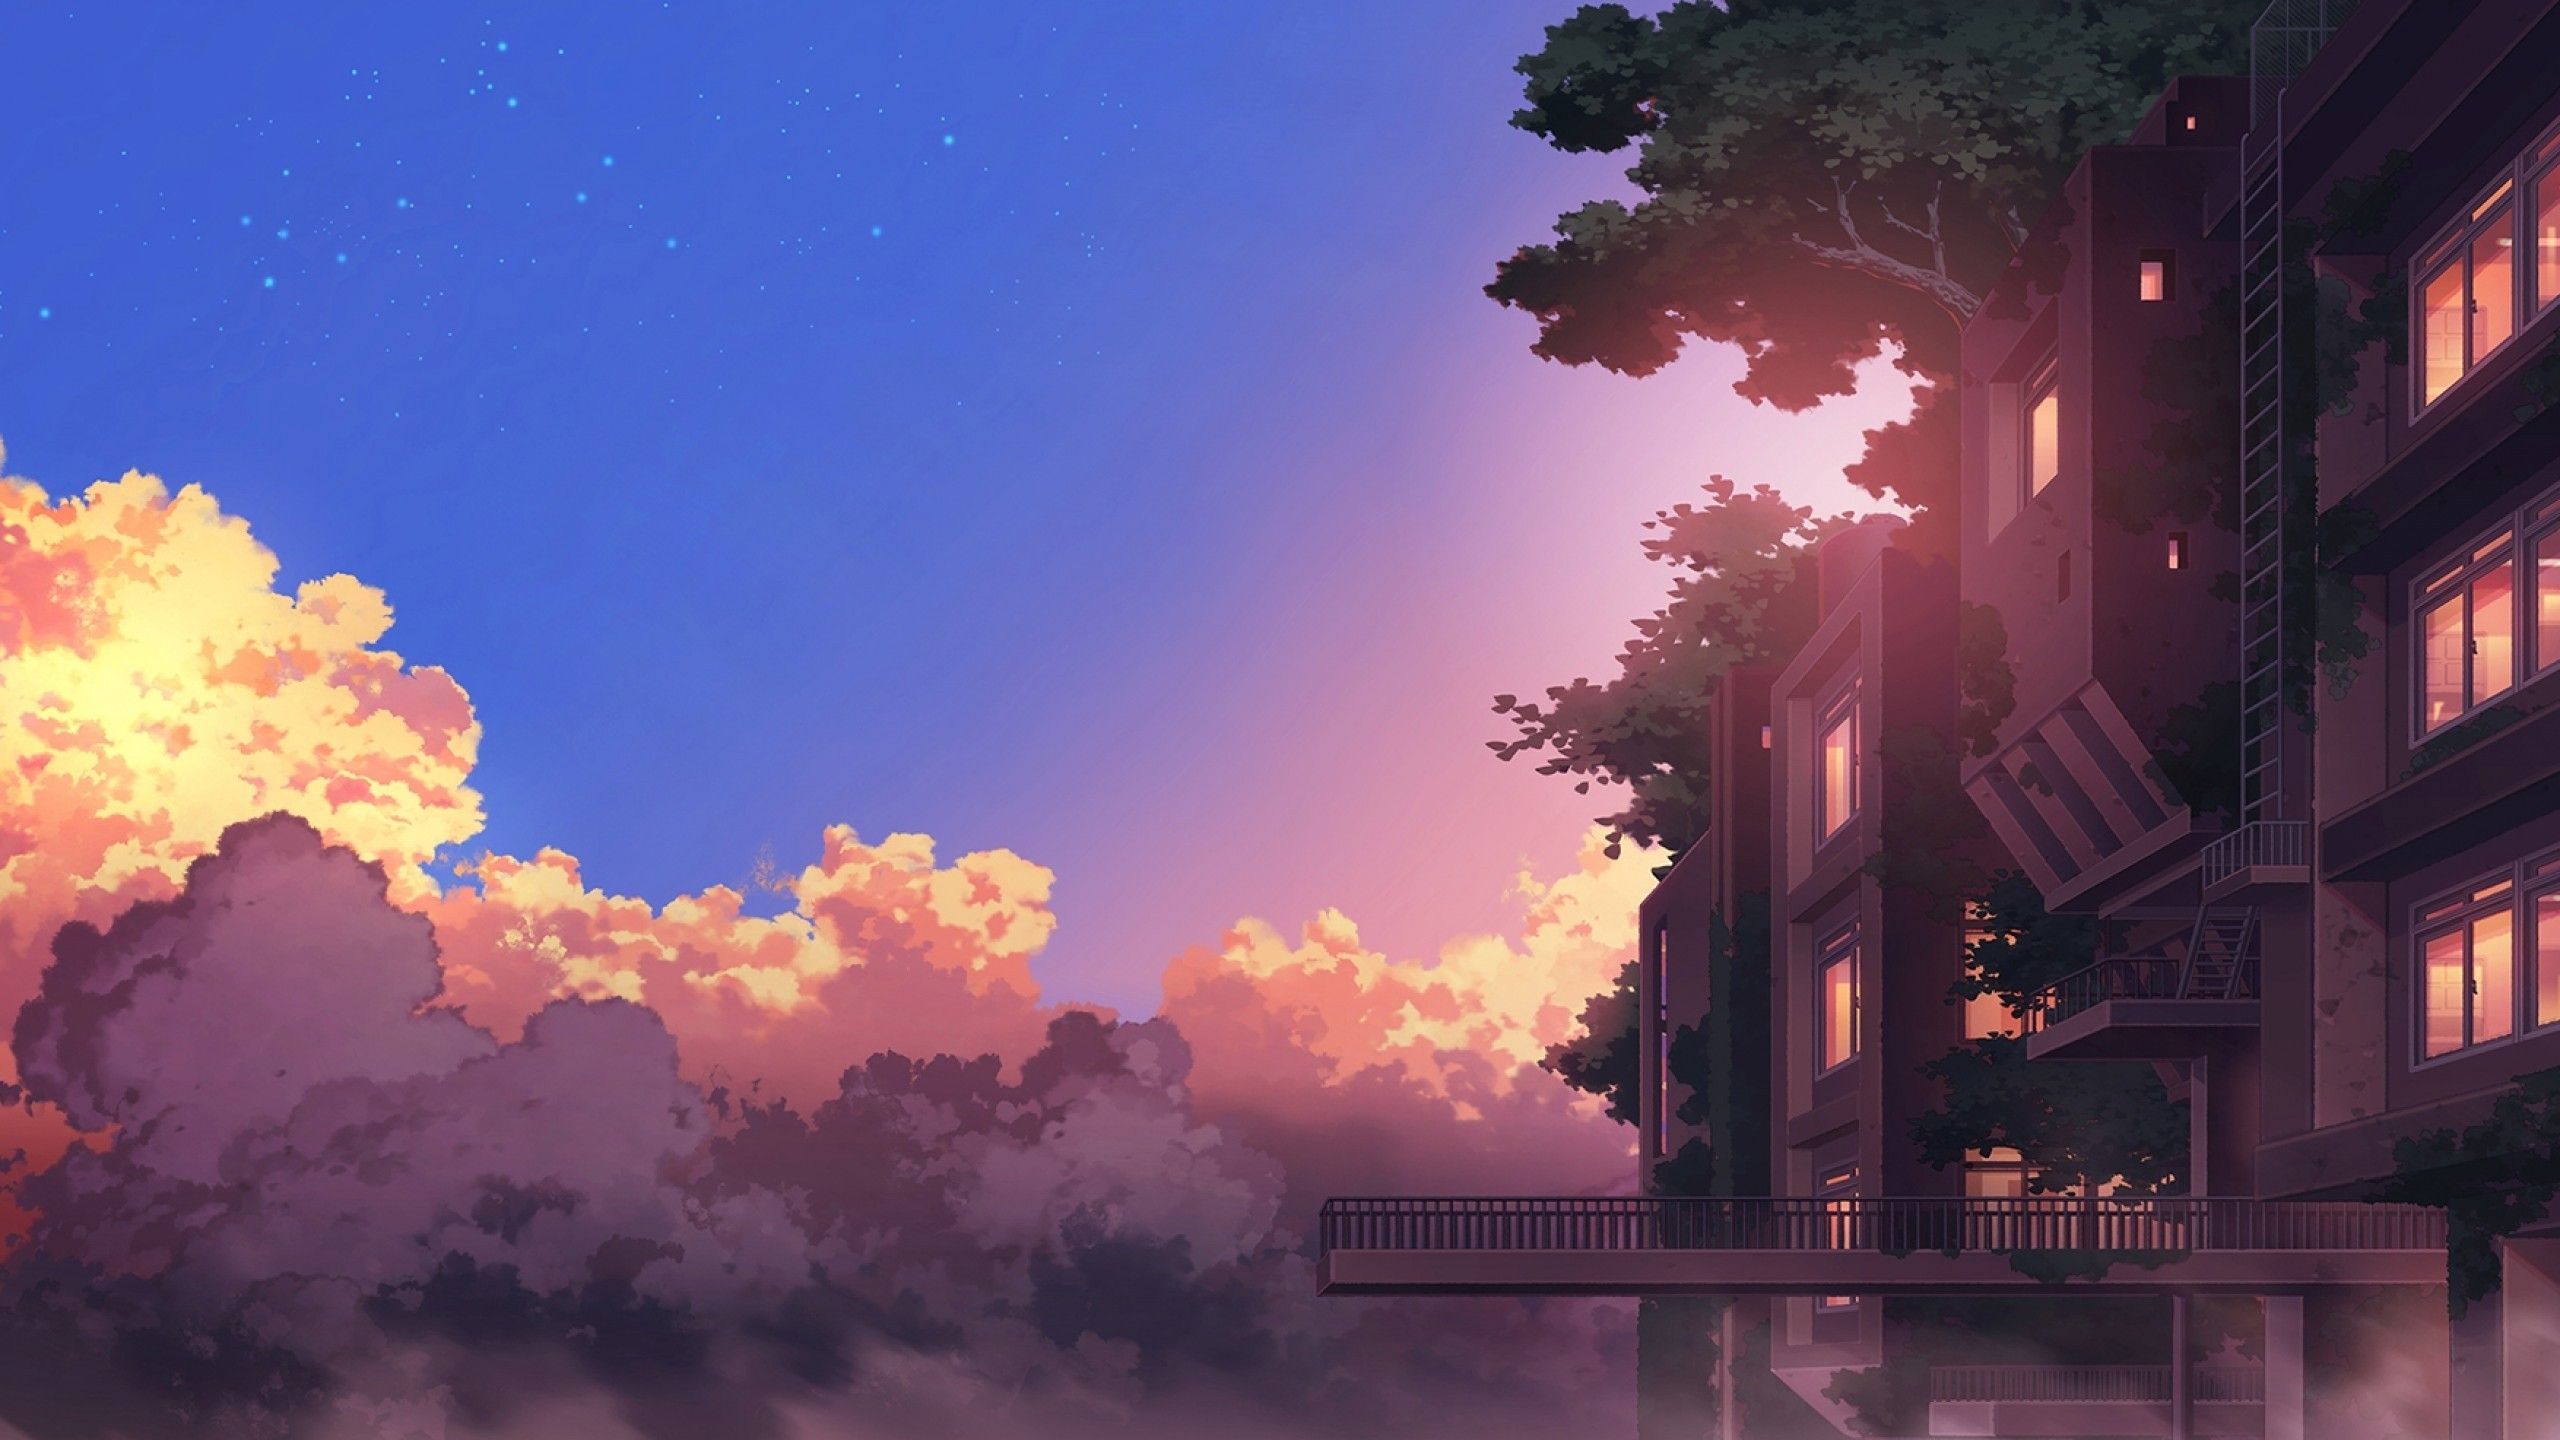 Download 2560x1440 Anime Landscape, Building, Sunset, Clouds, Scenic Wallpaper for iMac 27 inch